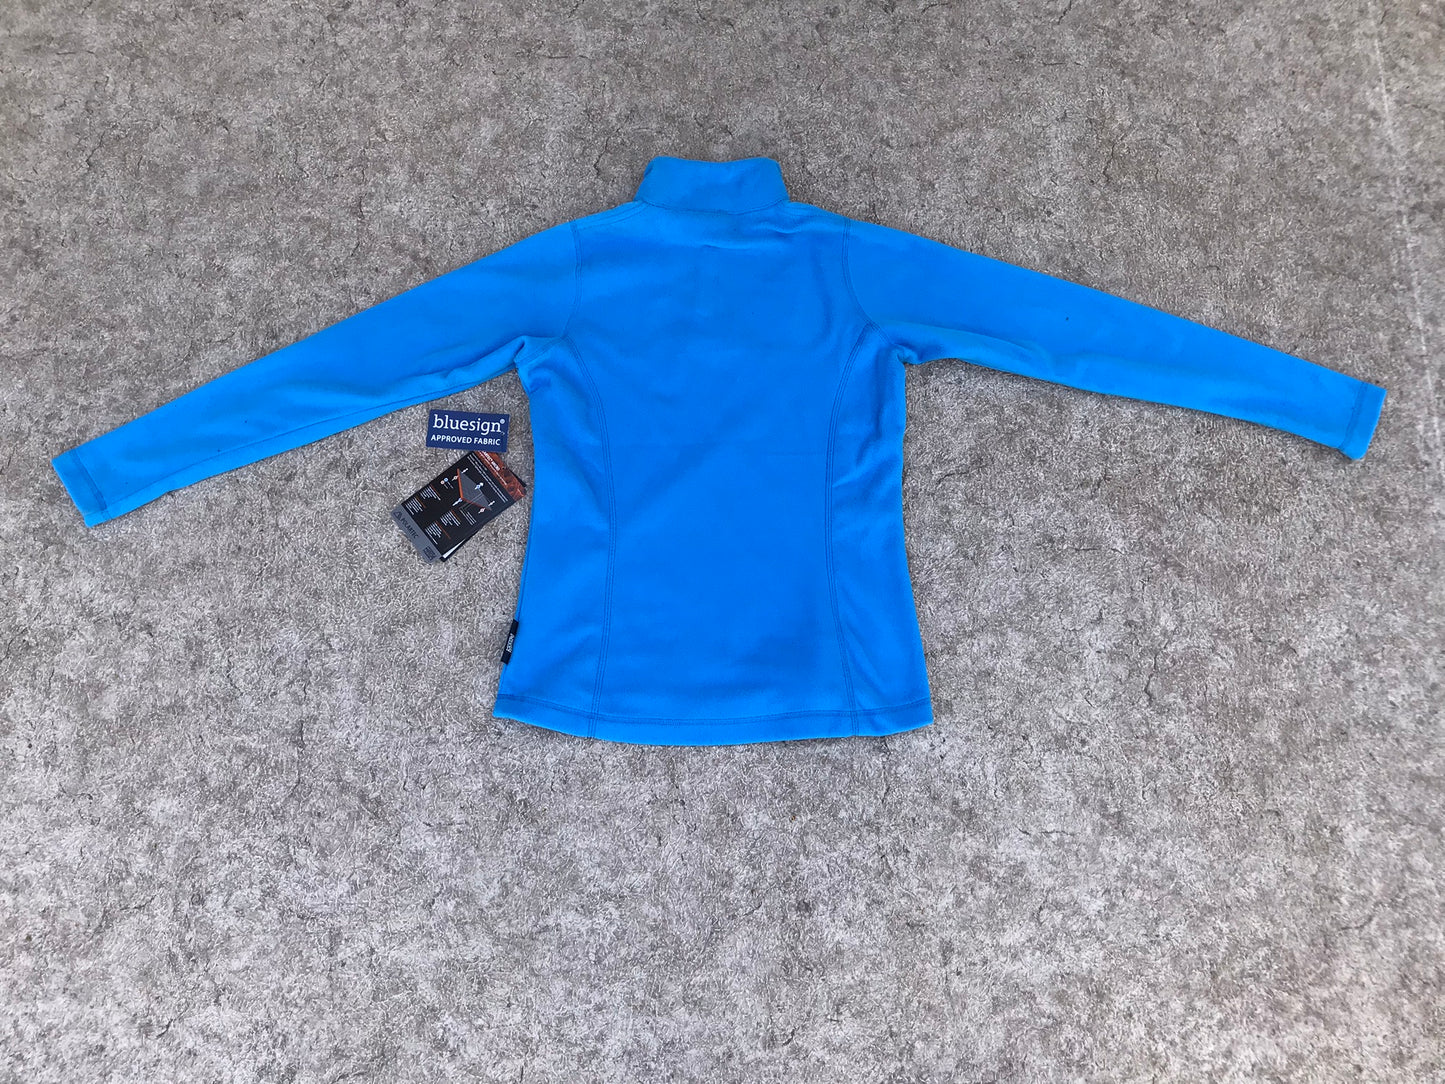 Winter Fleece Pull  Over Child Size 14-16 Helly Hansen Blue Fushia NEW With Tags